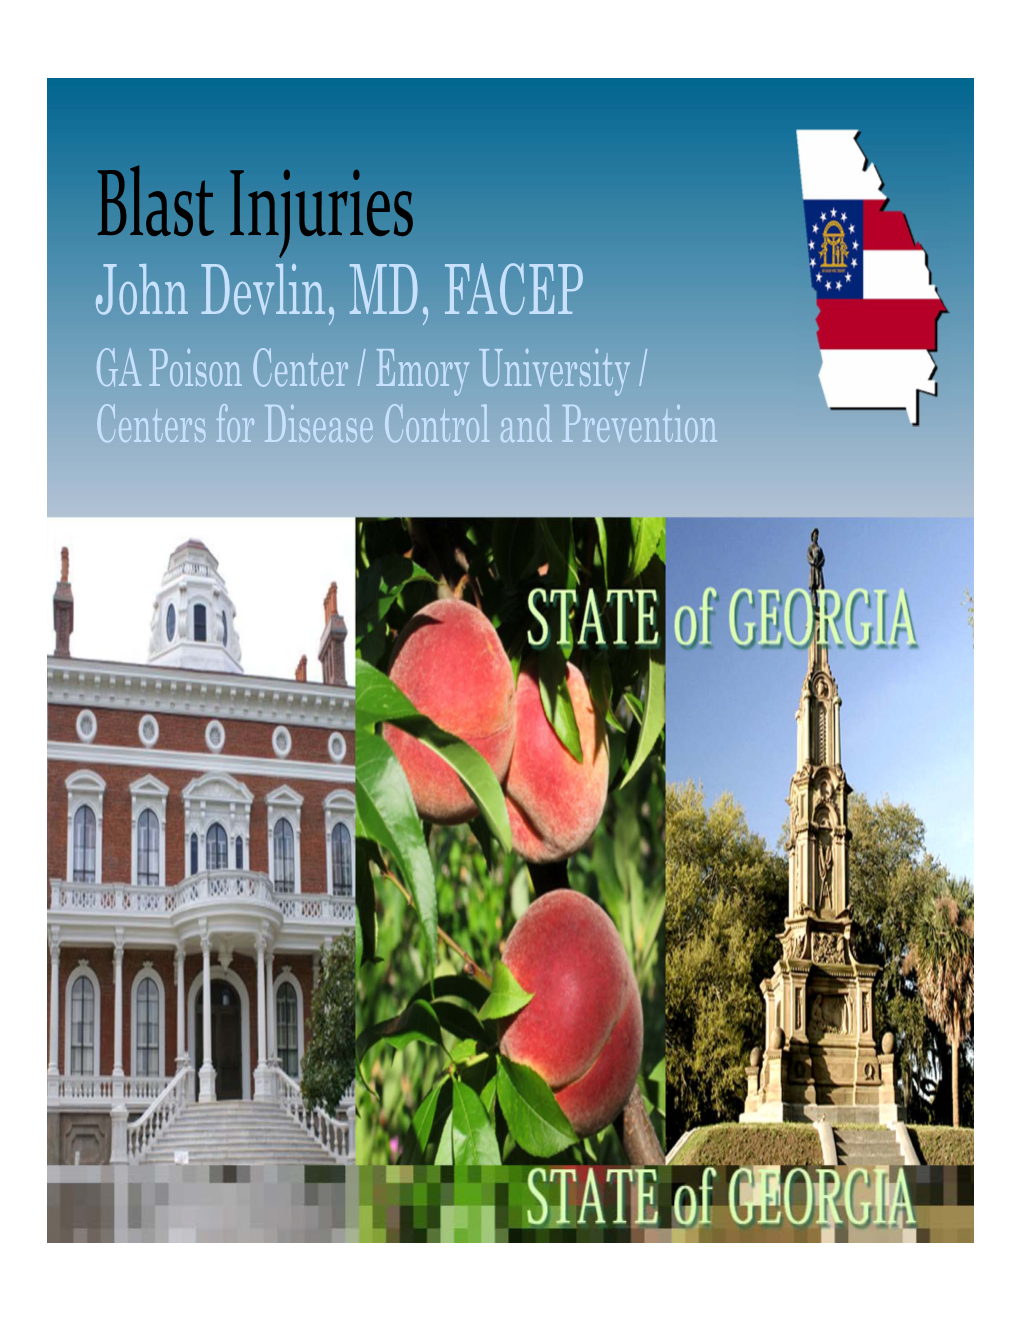 Blast Injuries John Devlin, MD, FACEP GA Poison Center / Emory University / Centers for Disease Control and Prevention Image Attribution